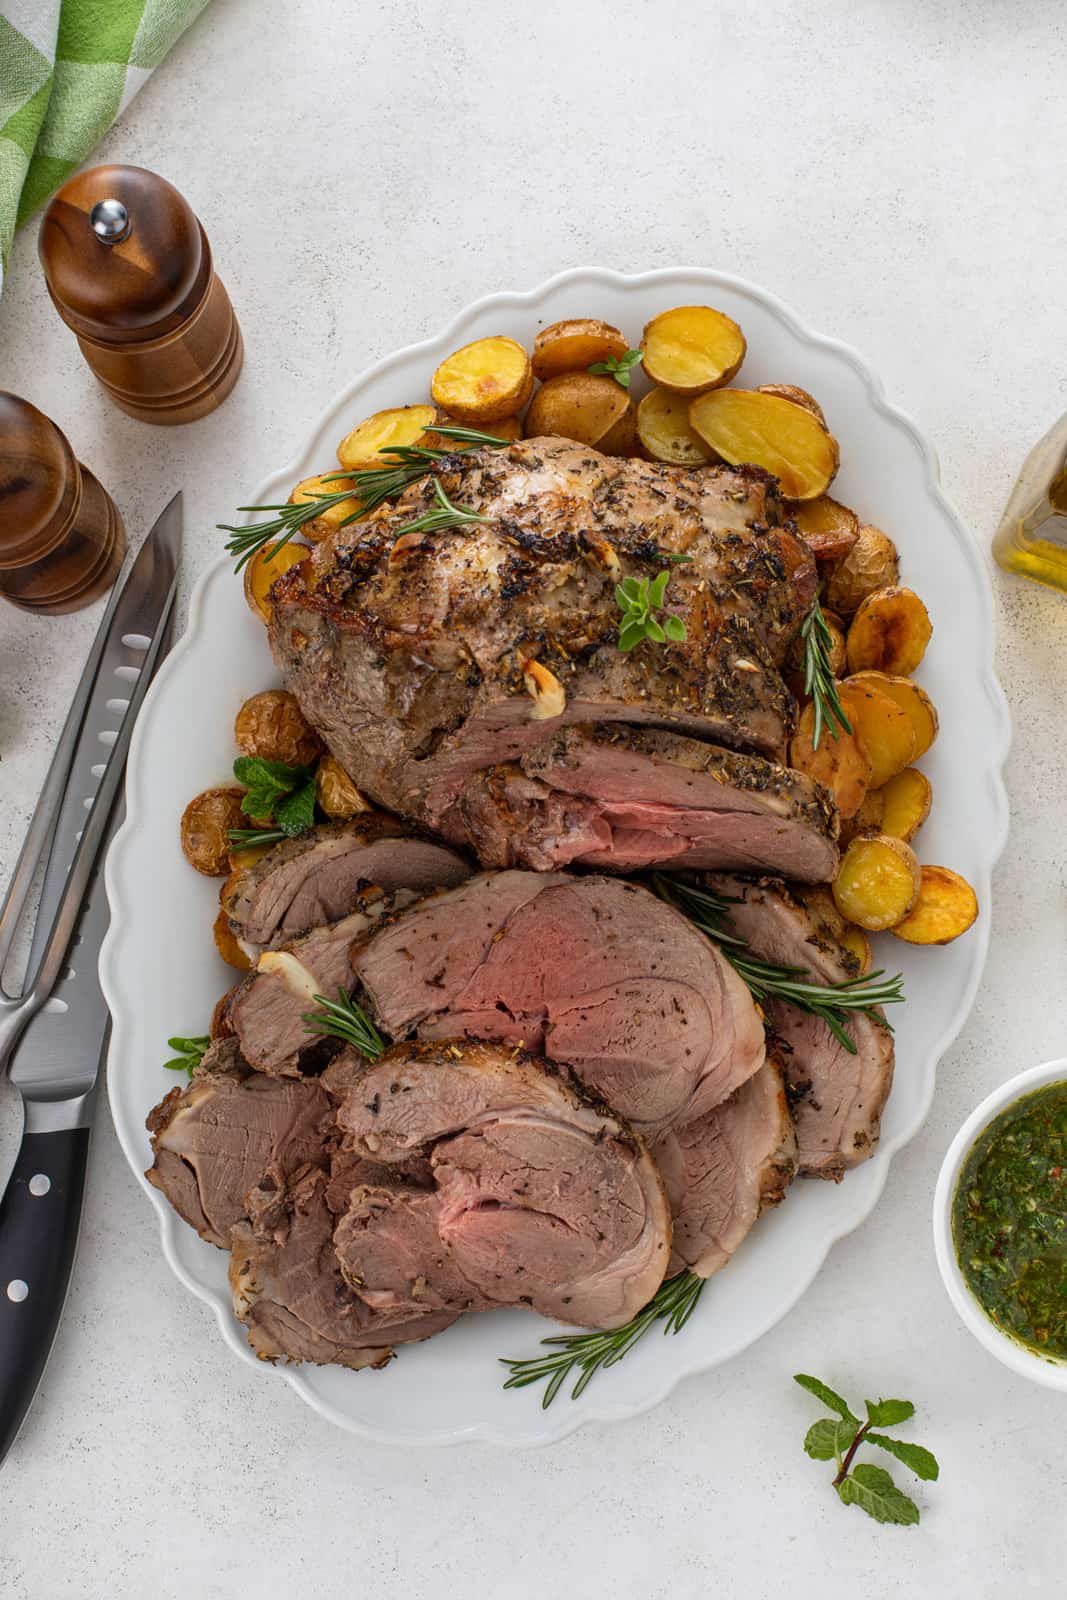 Overhead view of sliced roasted boneless leg of lamb on a platter, surrounded by roasted potatoes.